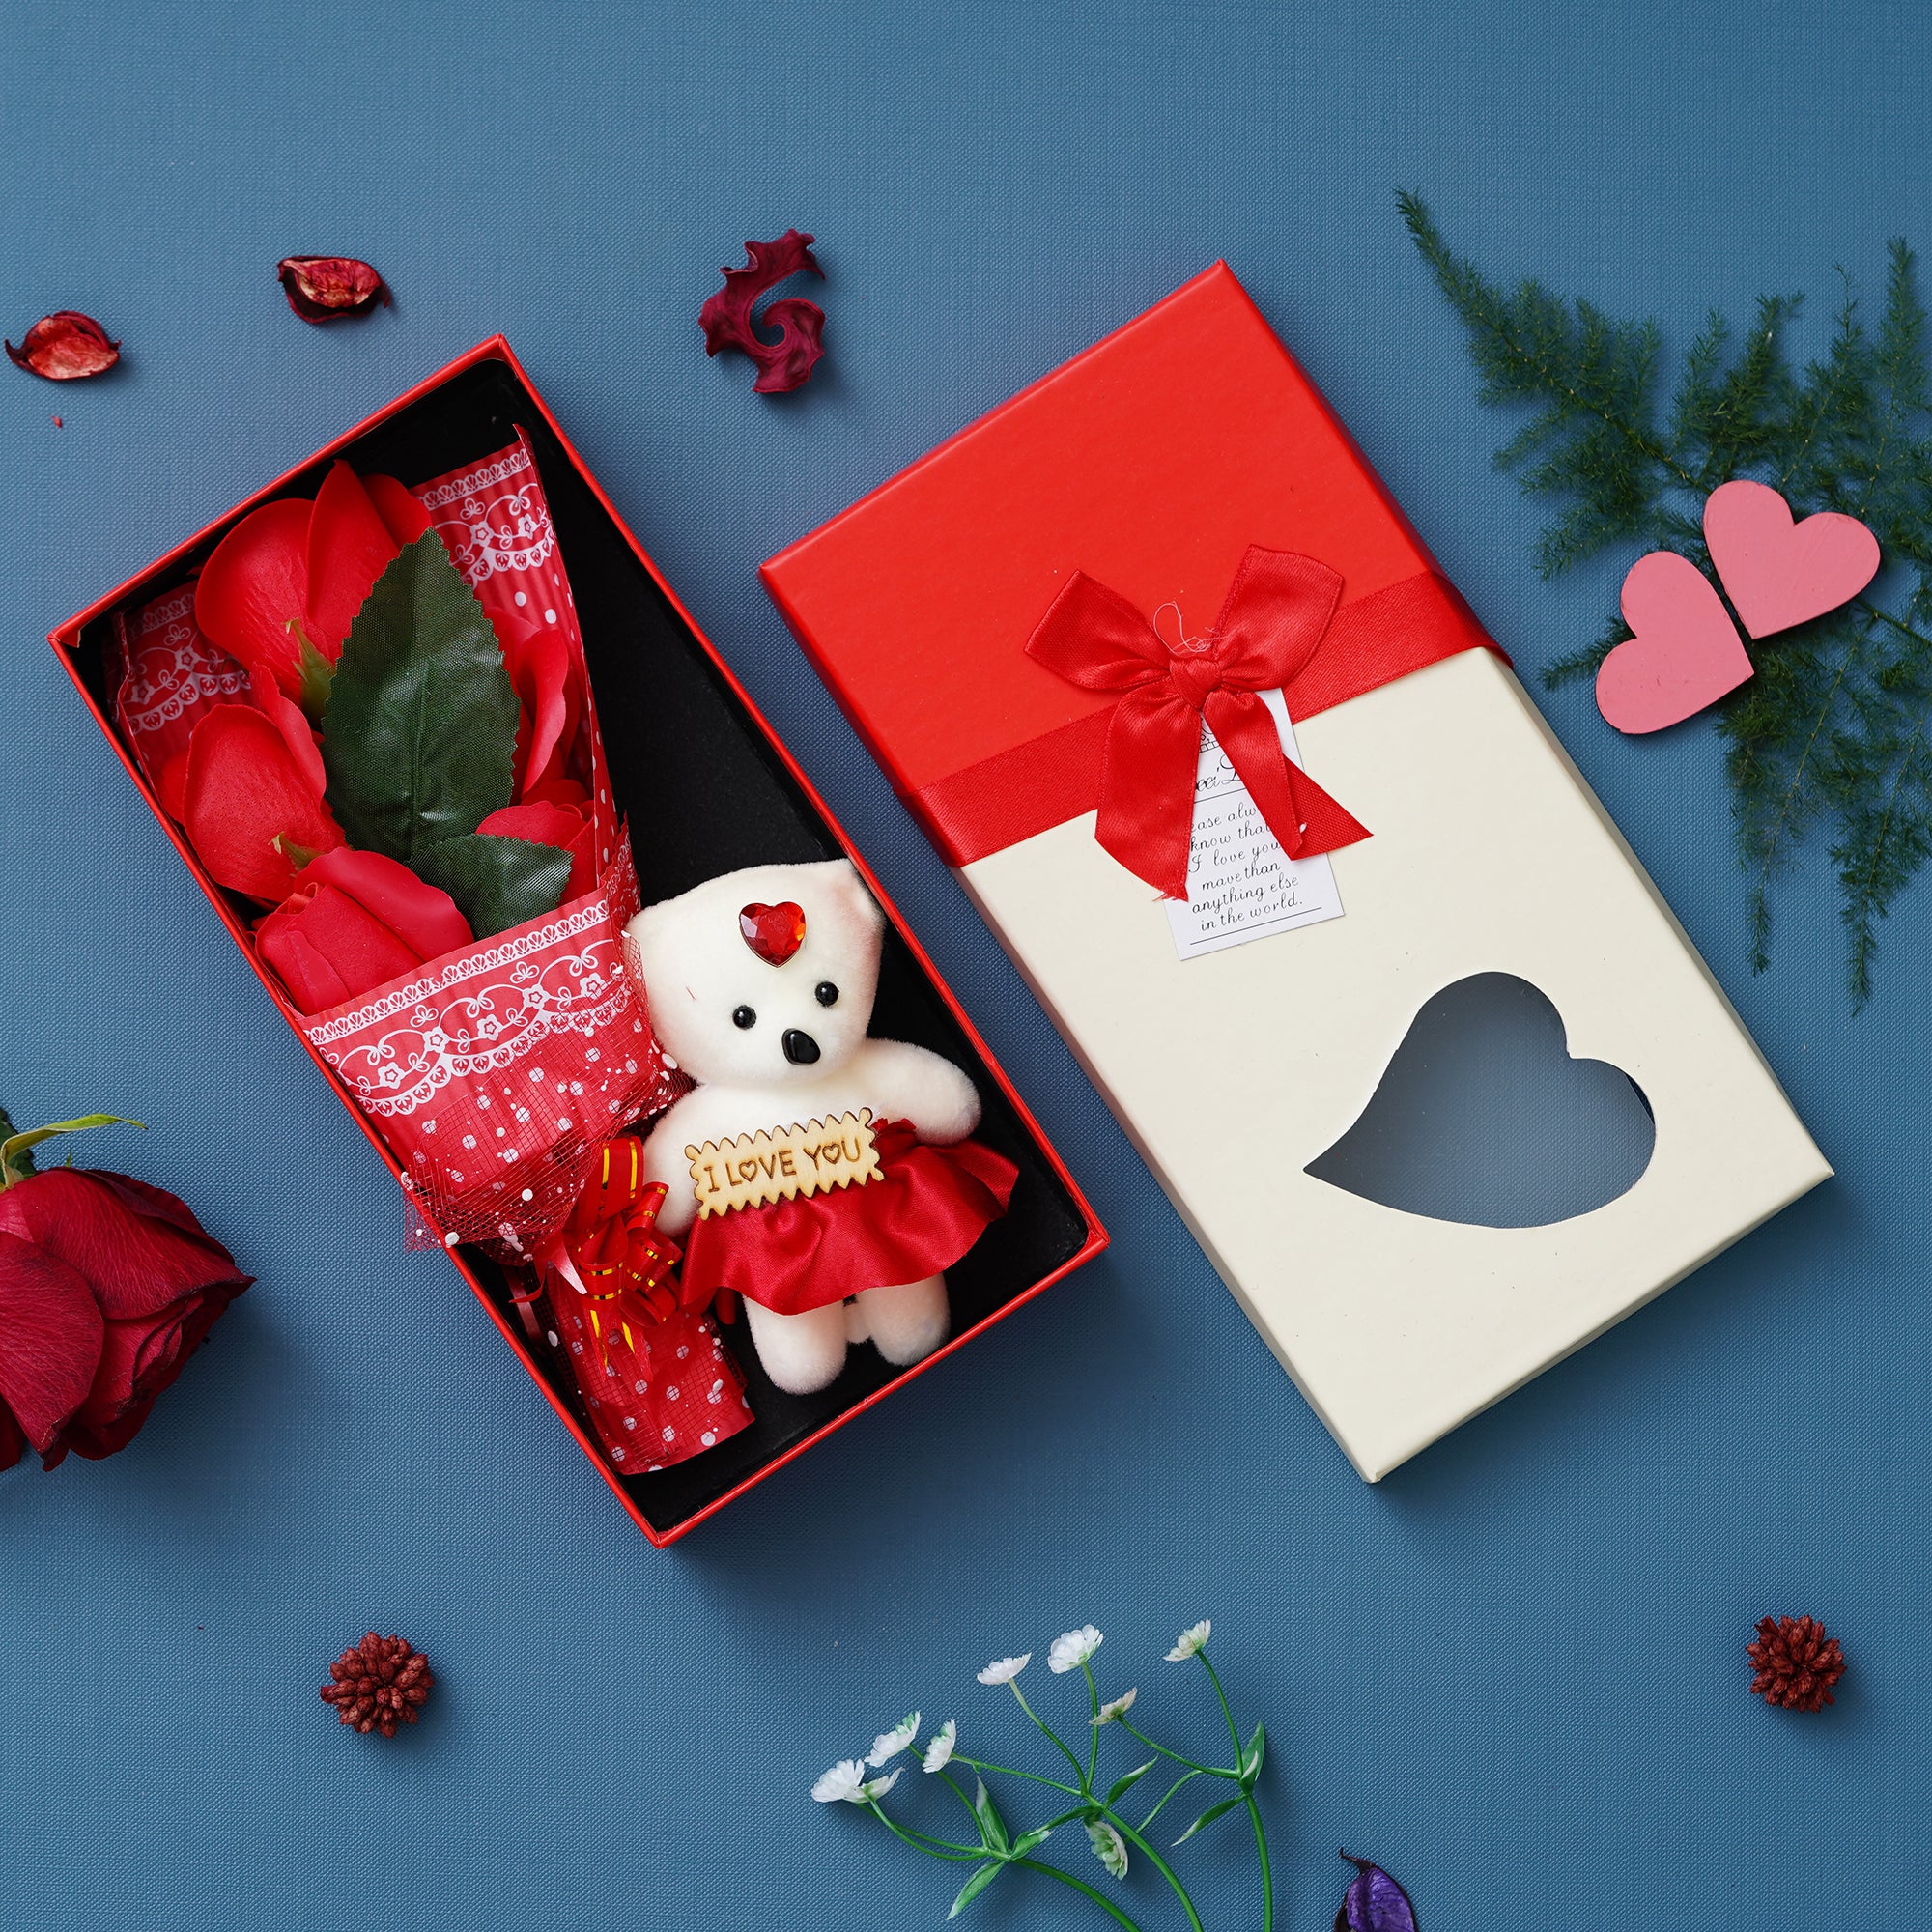 Valentine Combo of Pack of 8 Love Gift Cards, "20 Reasons Why I Need You" Printed on Little Hearts Wooden Gift Set, Red Roses Bouquet and White, Red Teddy Bear Valentine's Rectangle Shaped Gift Box 5